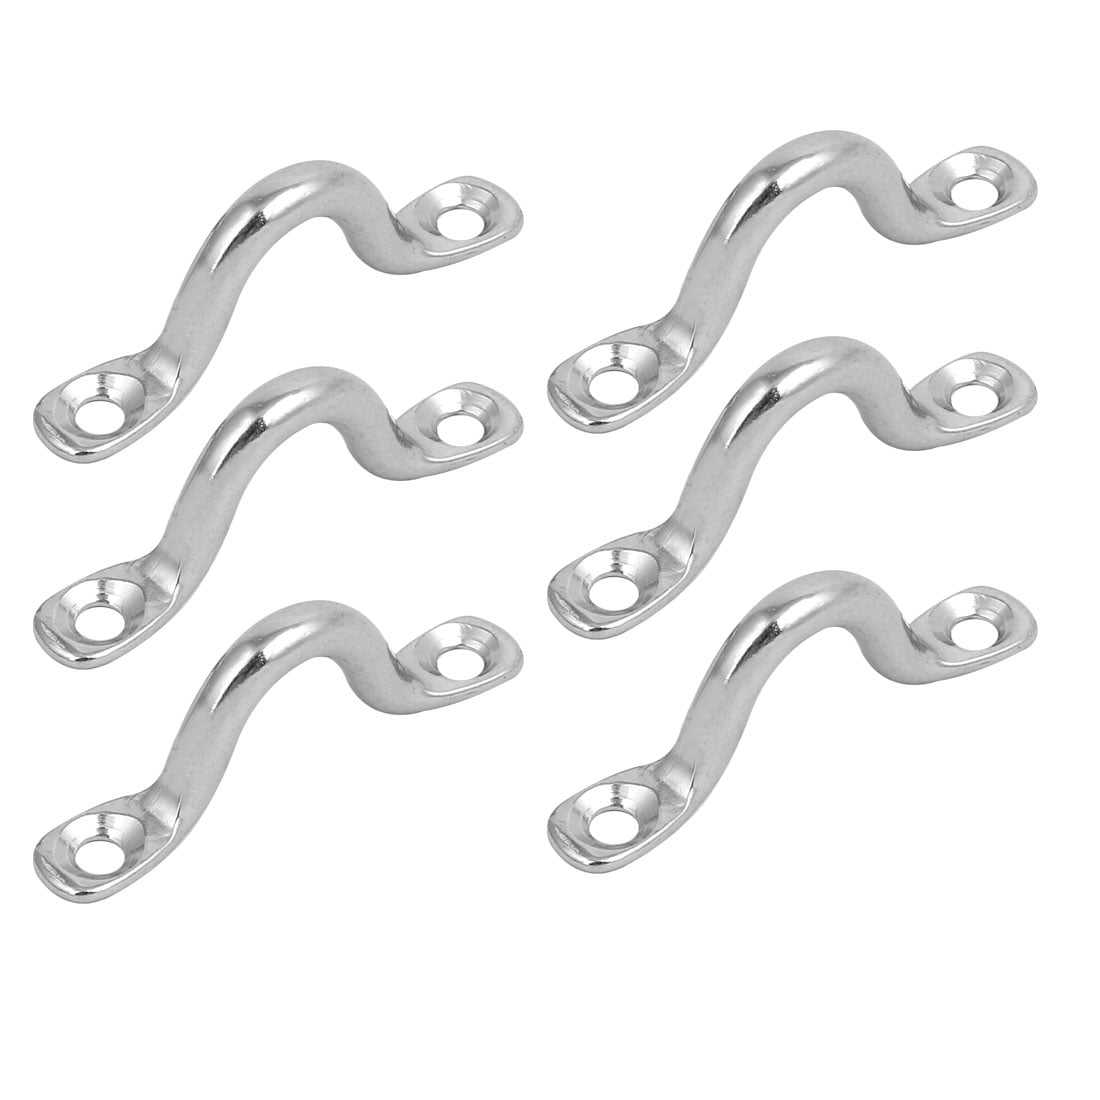 316 Stainless Steel 5mm Thick Humpback Shape Fixed Buckle Pad Eye Plate 6pcs 